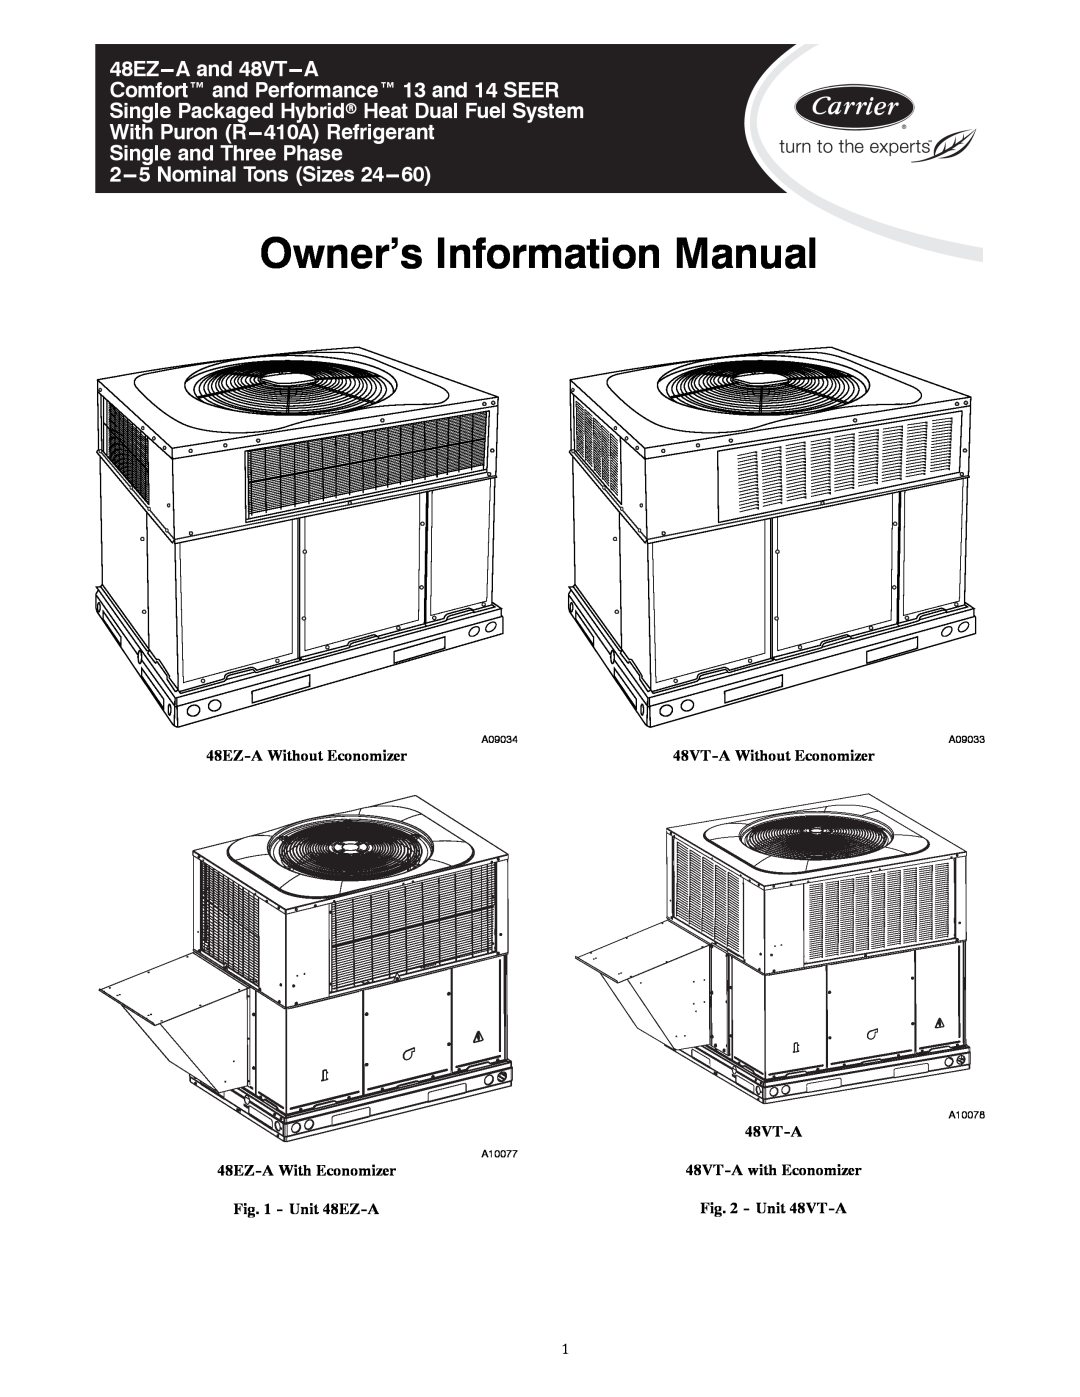 Carrier 48VT-A manual Owner’s Information Manual, 48EZ---Aand 48VT---A, Comfort and Performance 13 and 14 SEER, A09034 